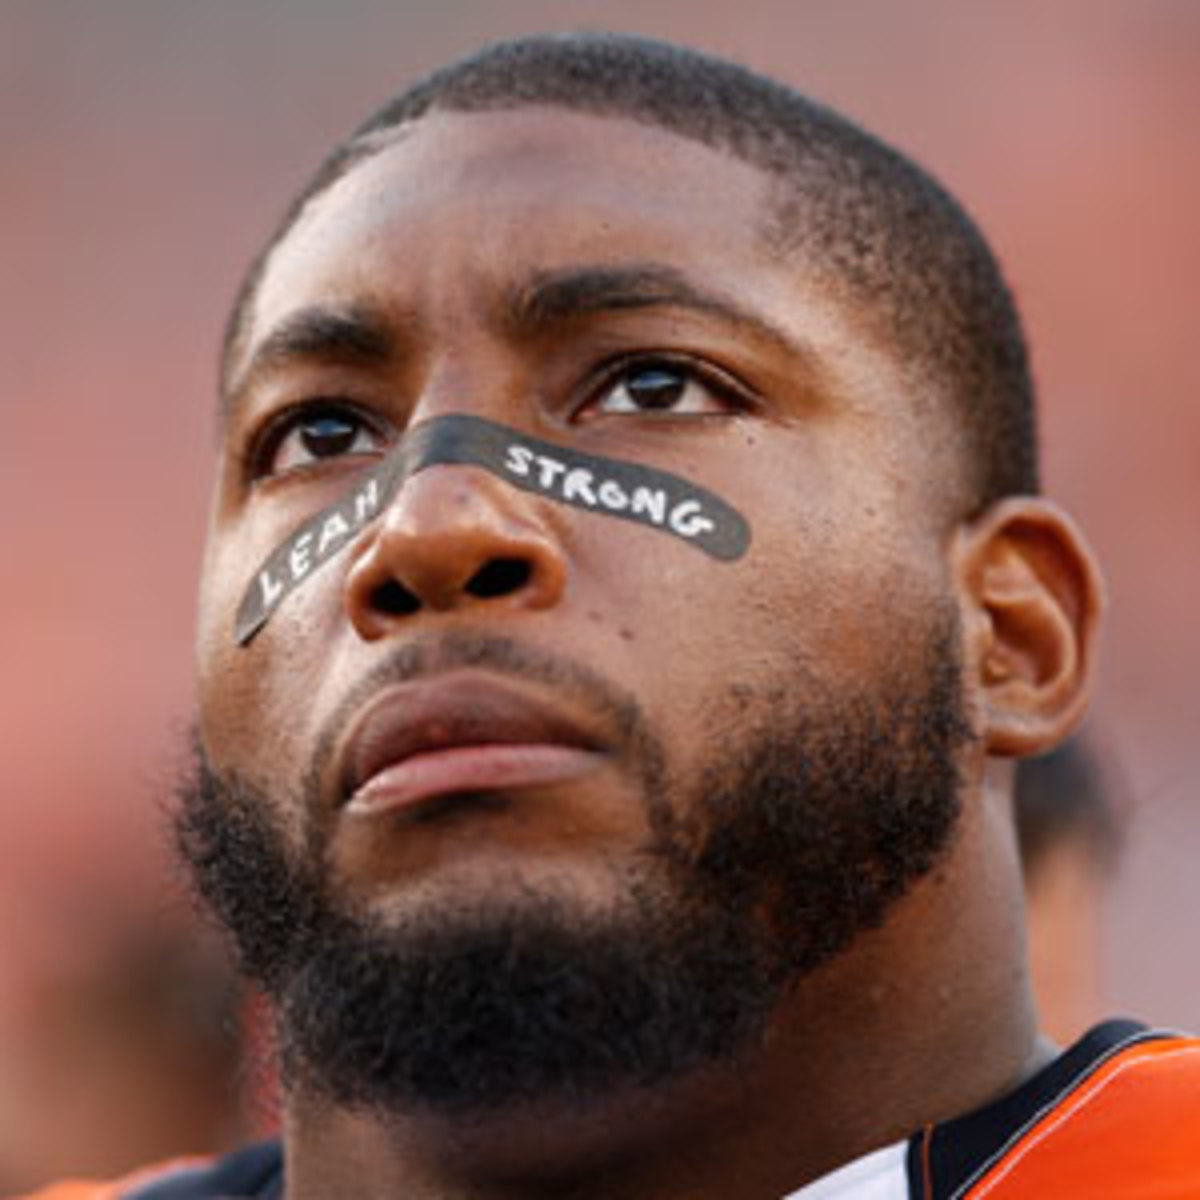 Devon Still wore "Leah Strong" patches for his daughter.